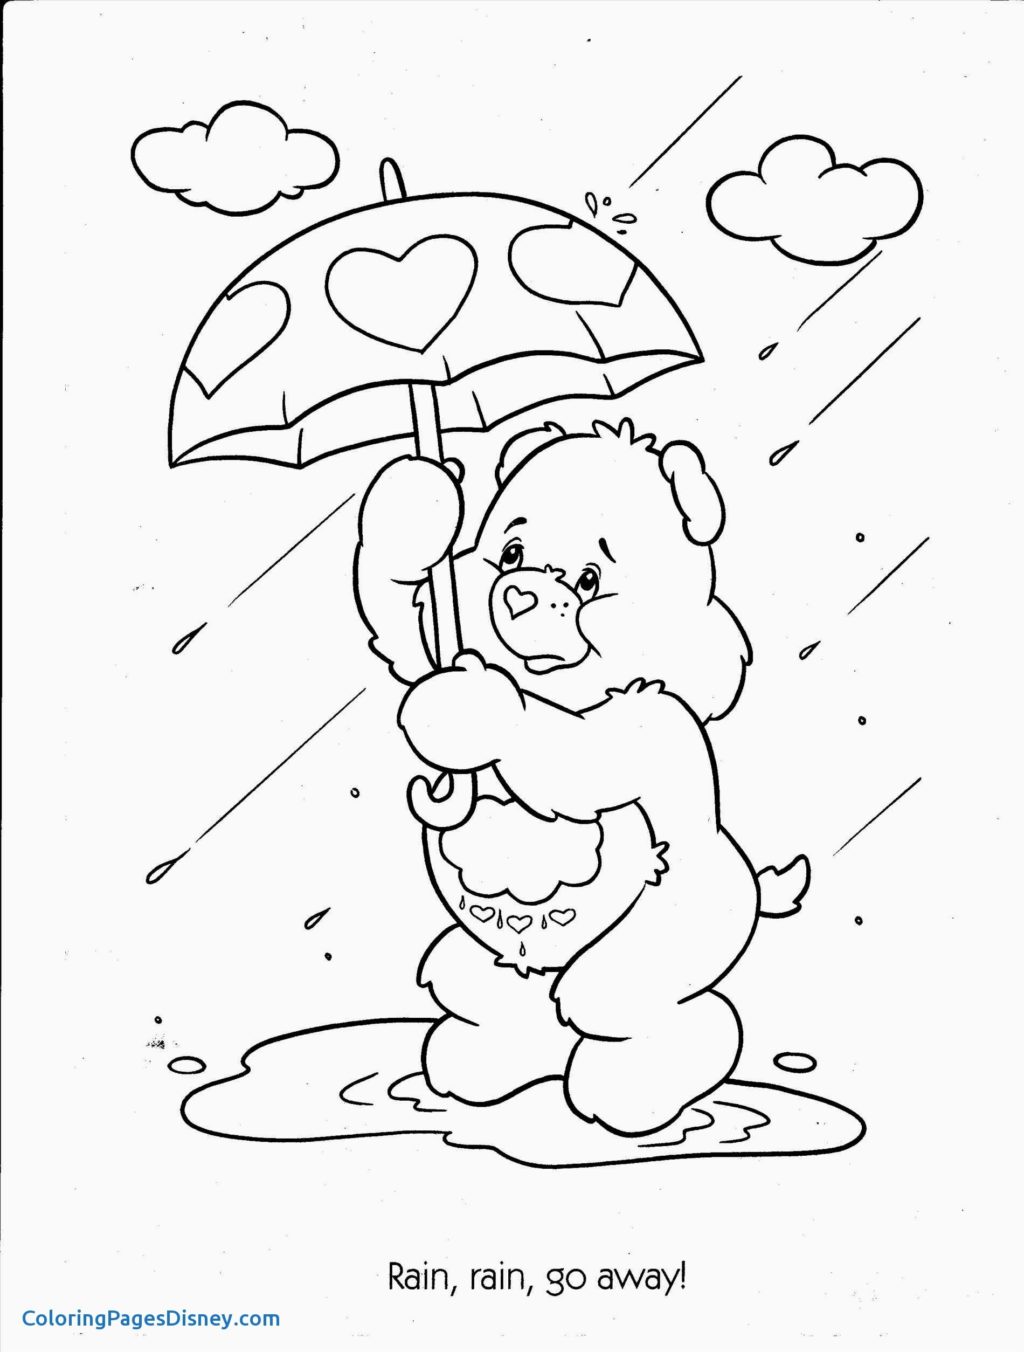 worksheet ~ Worksheet Coloring For Kids Preschool Rainy Sheets Printable  Free Weather Useful Unique Worksheets Colouring Fall That Are Letter Sheet  Color Red Recognition Pdf Practice And 45 Sheets For Colouring Image